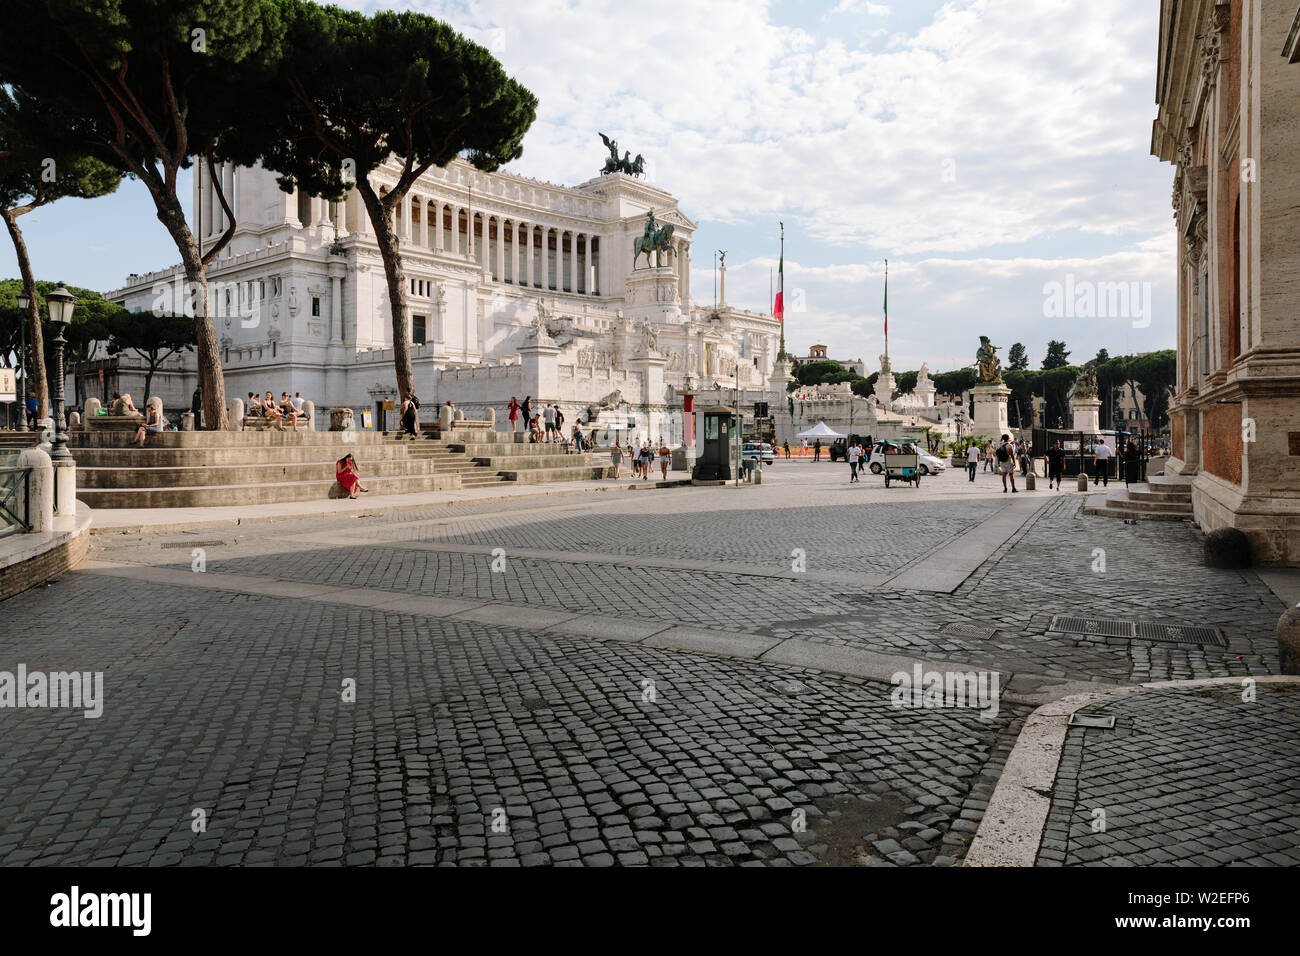 Rome, Italy - June 19, 2018: Panoramic front view of museum the Vittorio Emanuele II Monument also known as the Vittoriano or Altare della Patria on P Stock Photo